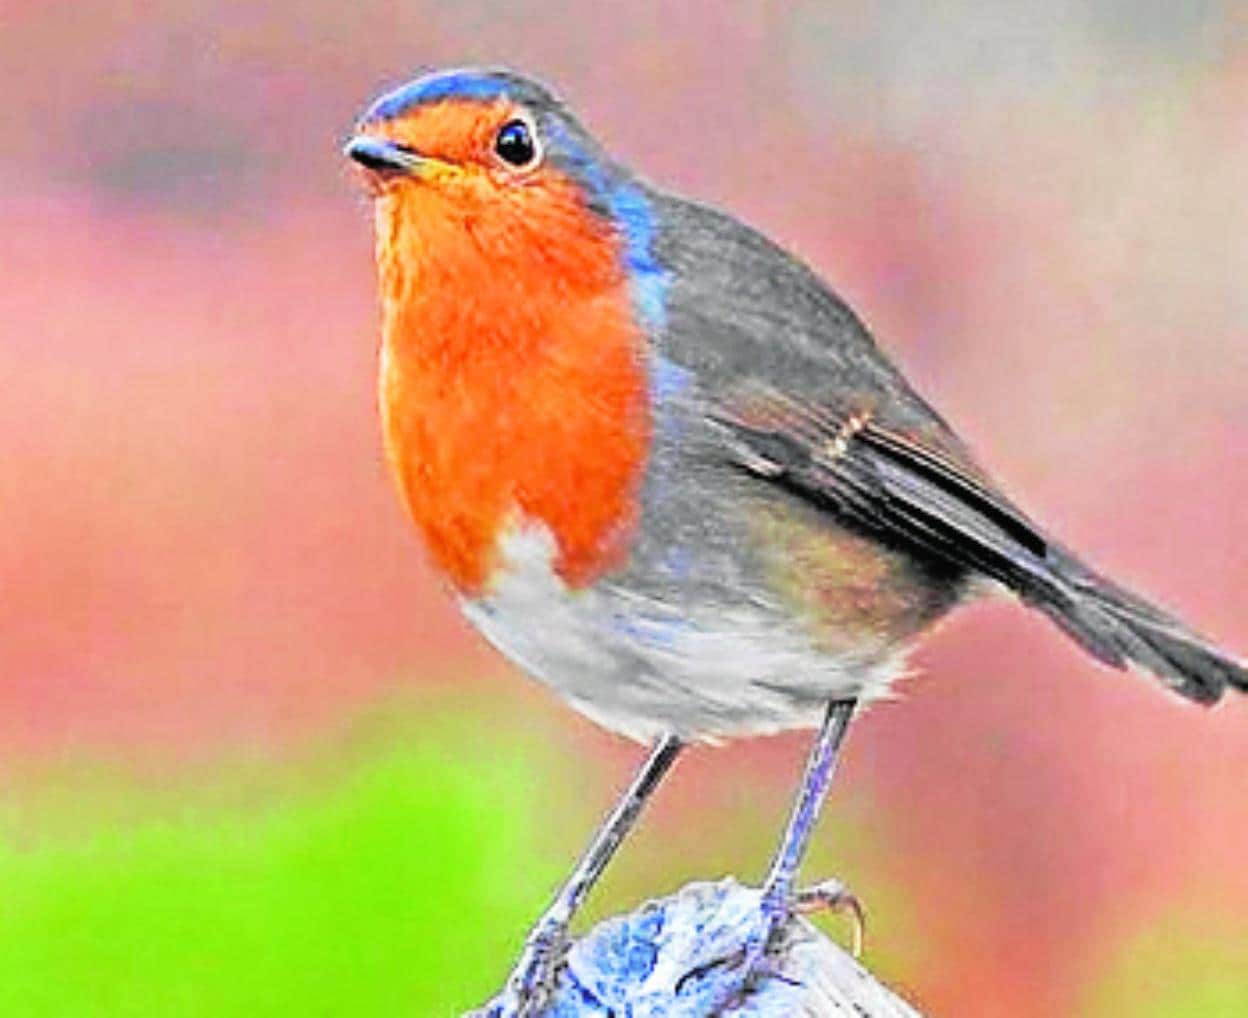 Birdwatch: the robin is one of our most familiar birds – yet it